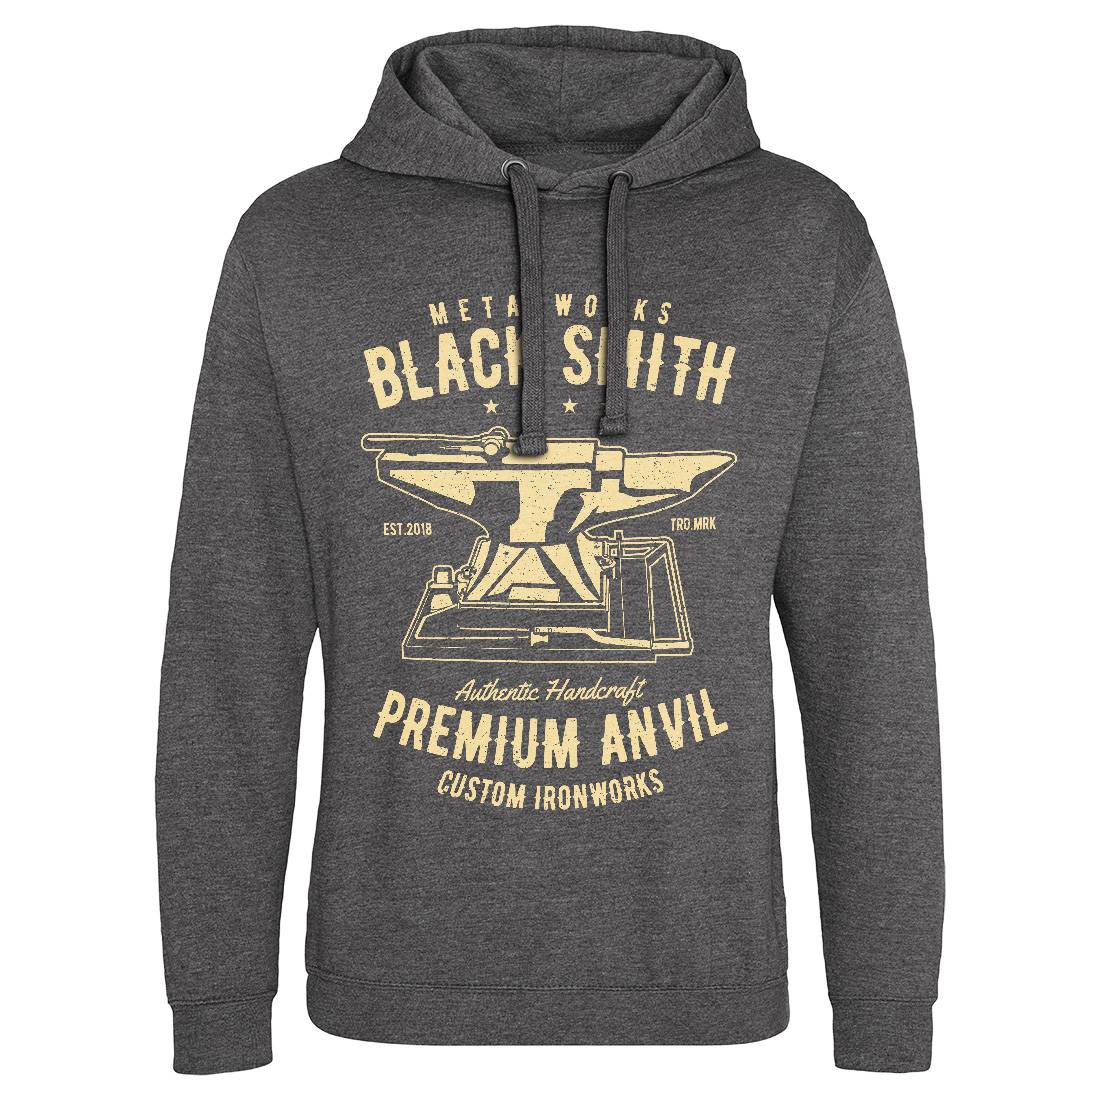 Blacksmith Mens Hoodie Without Pocket Work A620